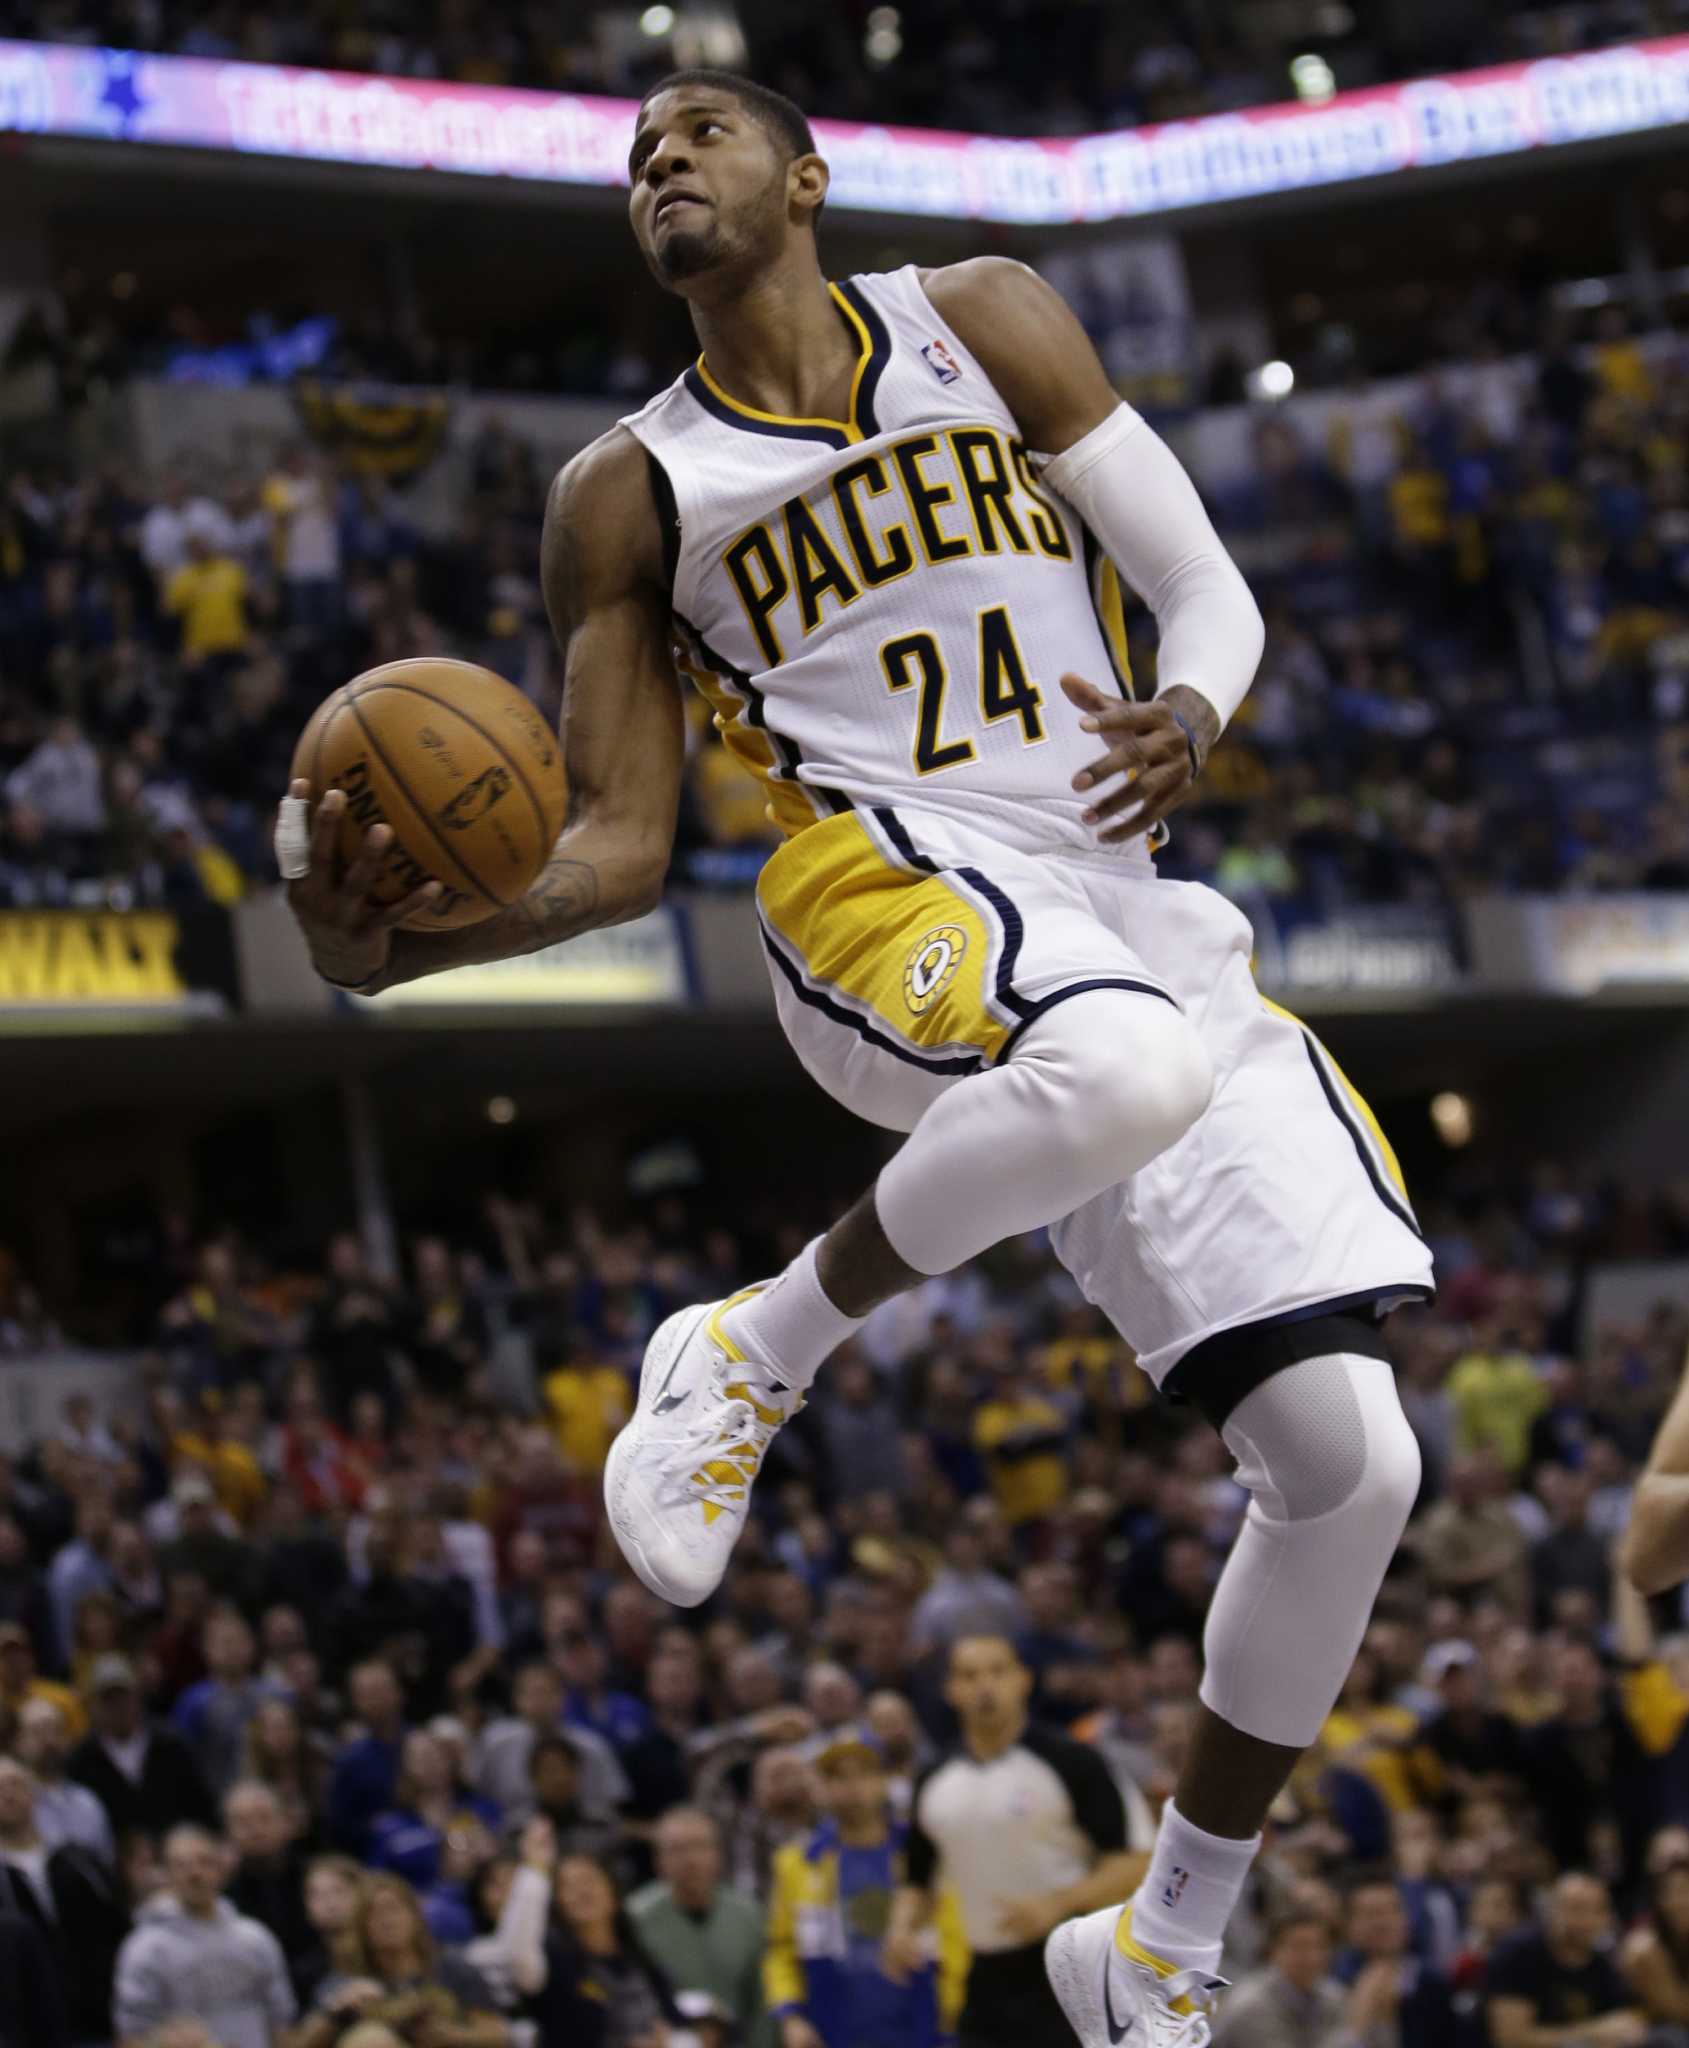 George, Pacers put on show vs. Clippers